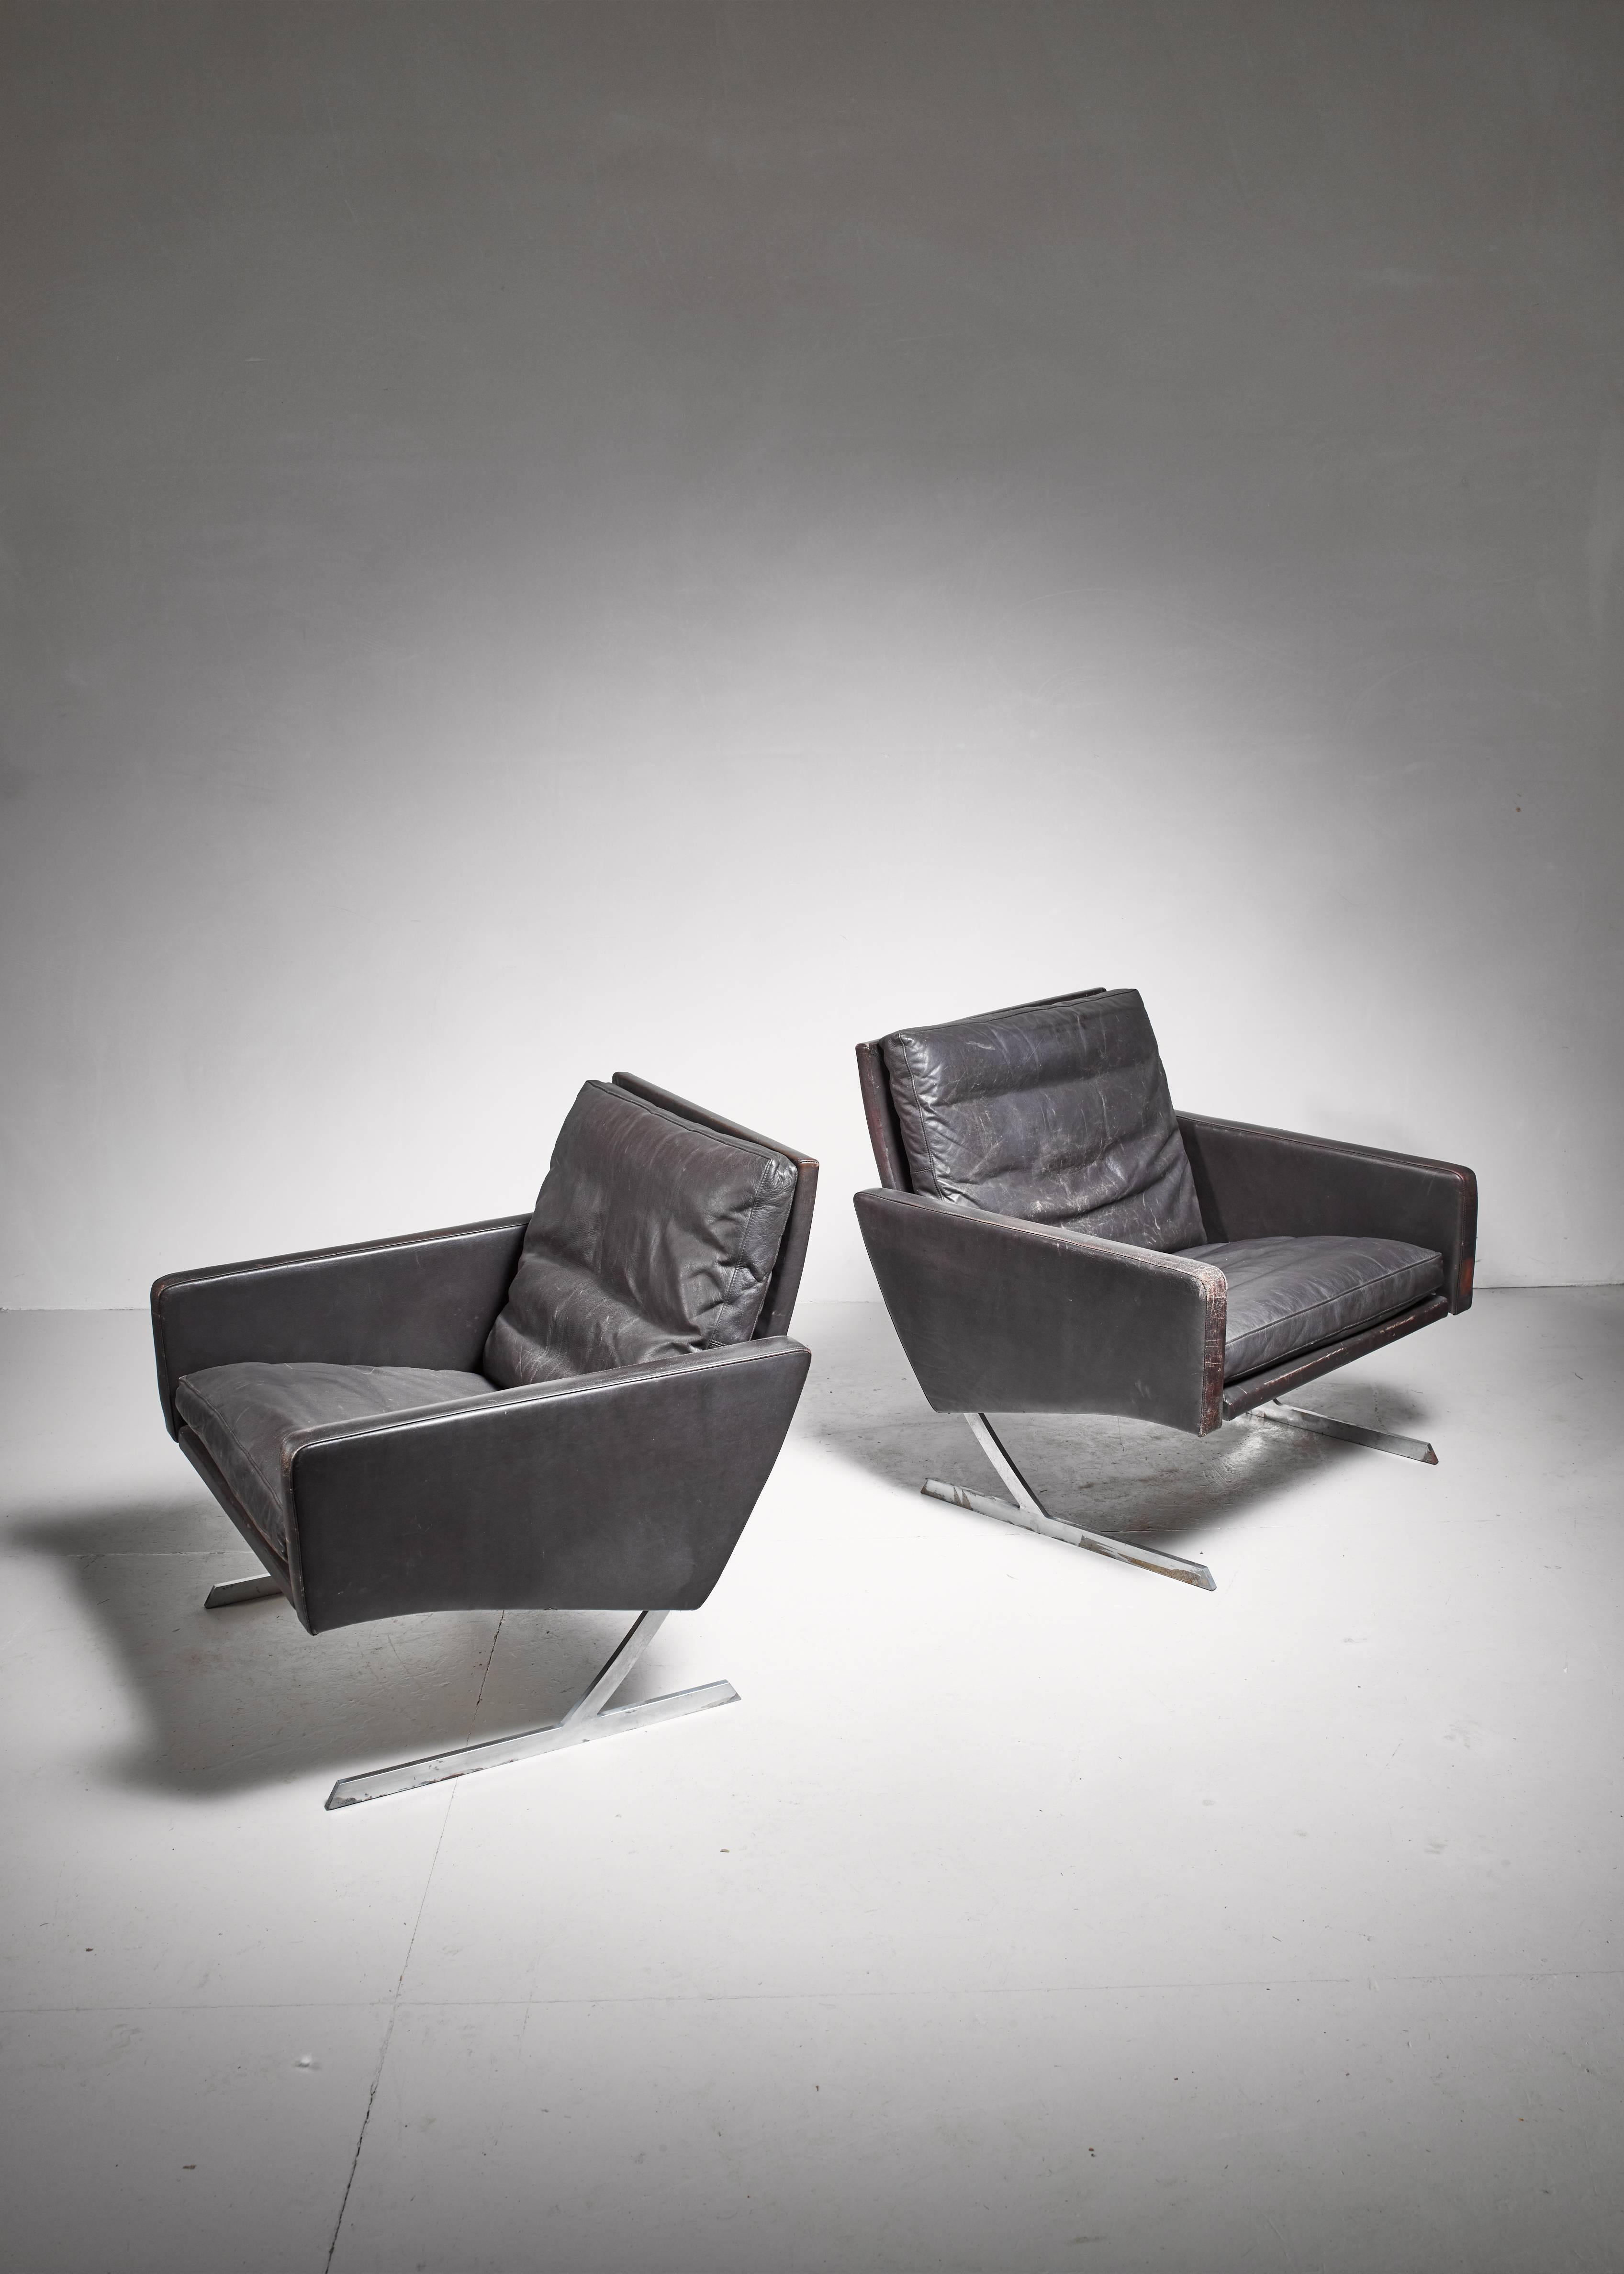 A pair of BO 701 lounge chairs by Preben Fabricius, from 1970 for Bo-ex.

The chairs are made of a steel frame with dark brown leather. The original leather is has age related wear.

 
 